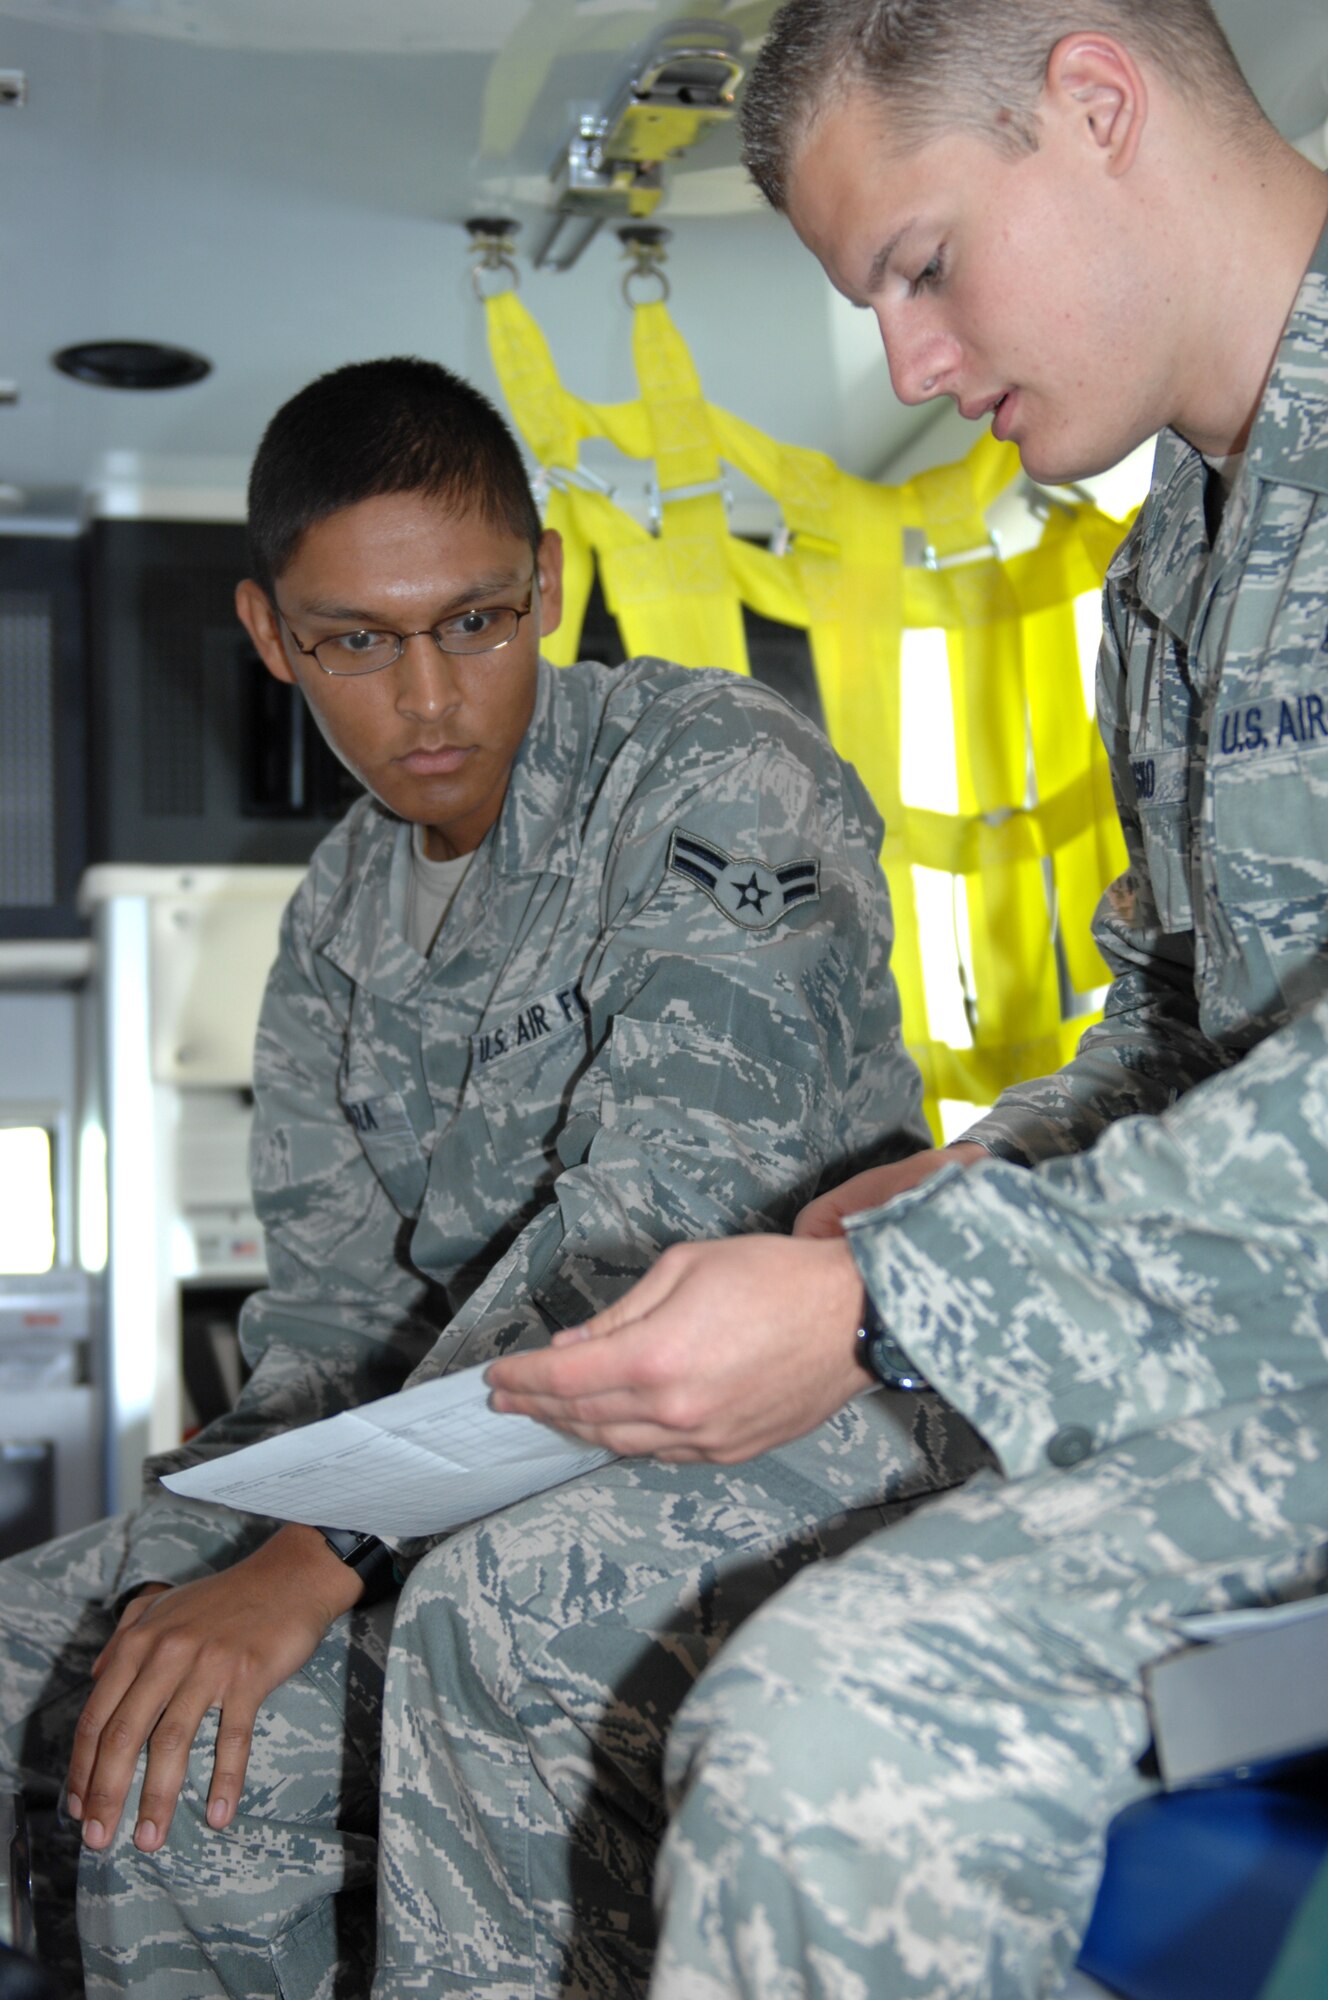 WHITEMAN AIR FORCE BASE, Mo.,- Senior Airman Jacob Rosko,509th Medical Operations Squadron ambulance service technician, trains Airman 1st Class Matthew Mendoza, 509th Medical Squadron ambulance service technician, on the morning ambulance checklist July 27. The team checks all equipment at the start of every shift. (U.S. Air Force photo by Airman 1st Class Cody H. Ramirez) (Released)